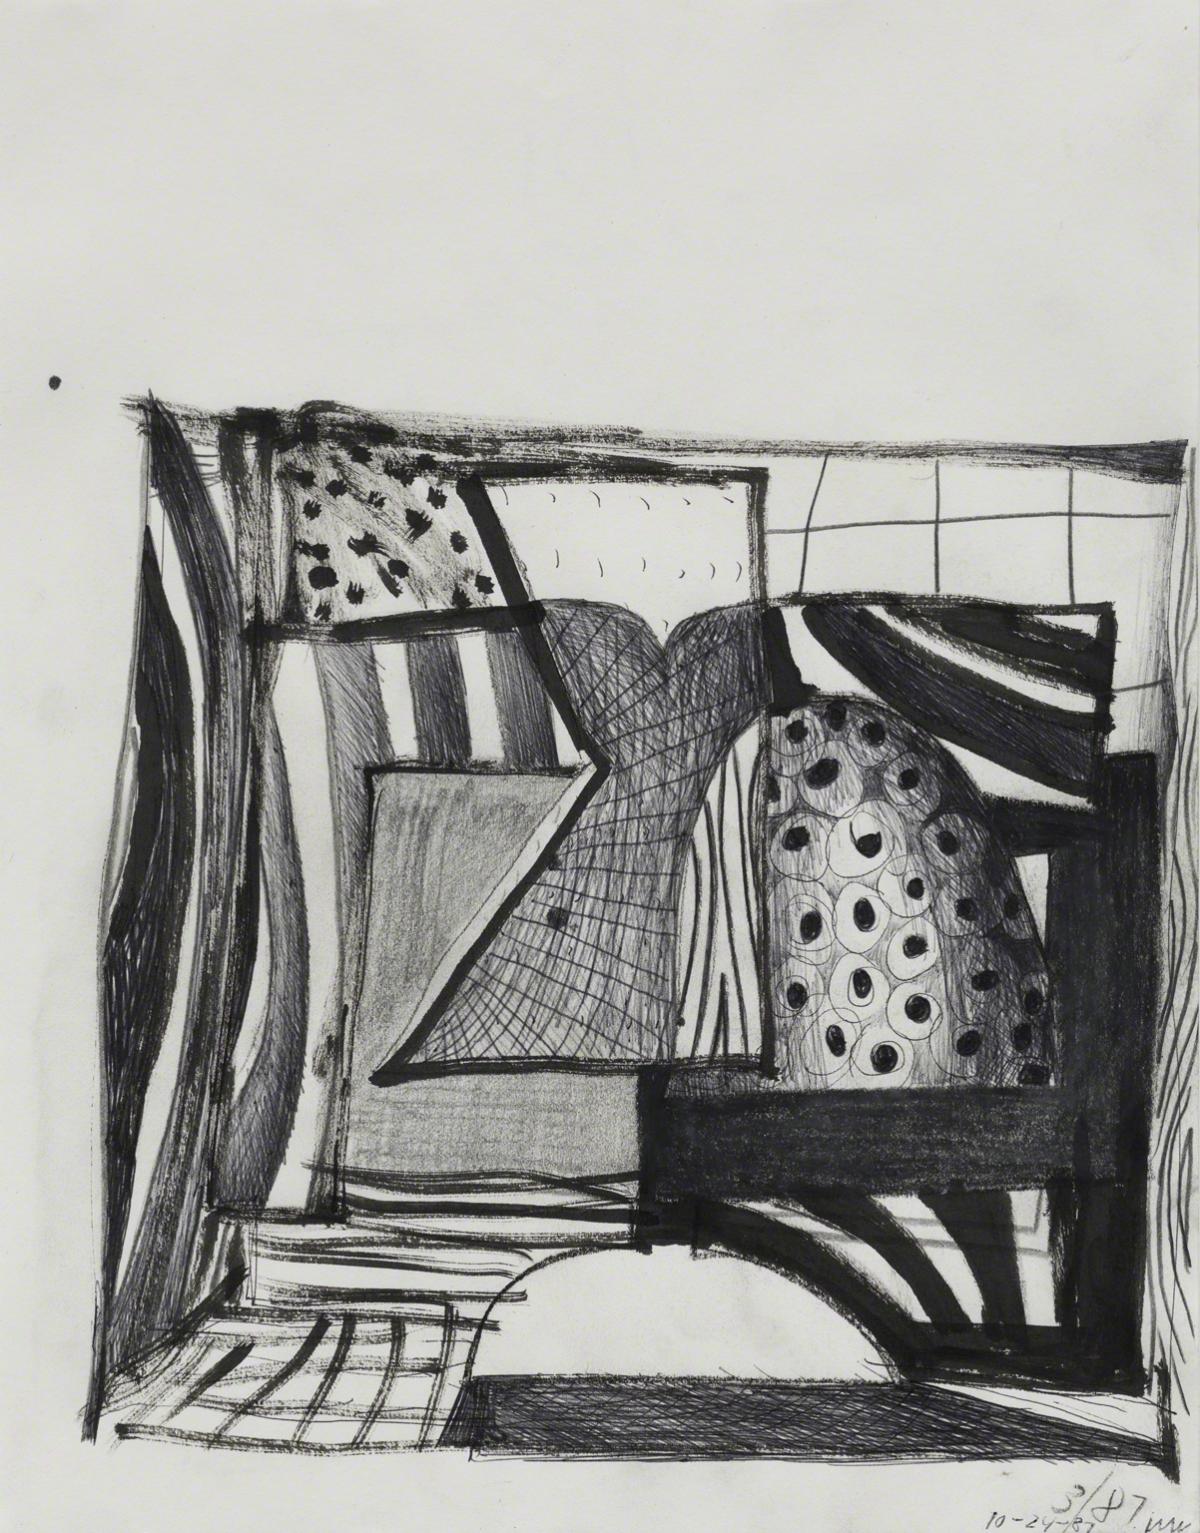 Abstract drawing in black ink on paper depicting various shapes with stripes and circles